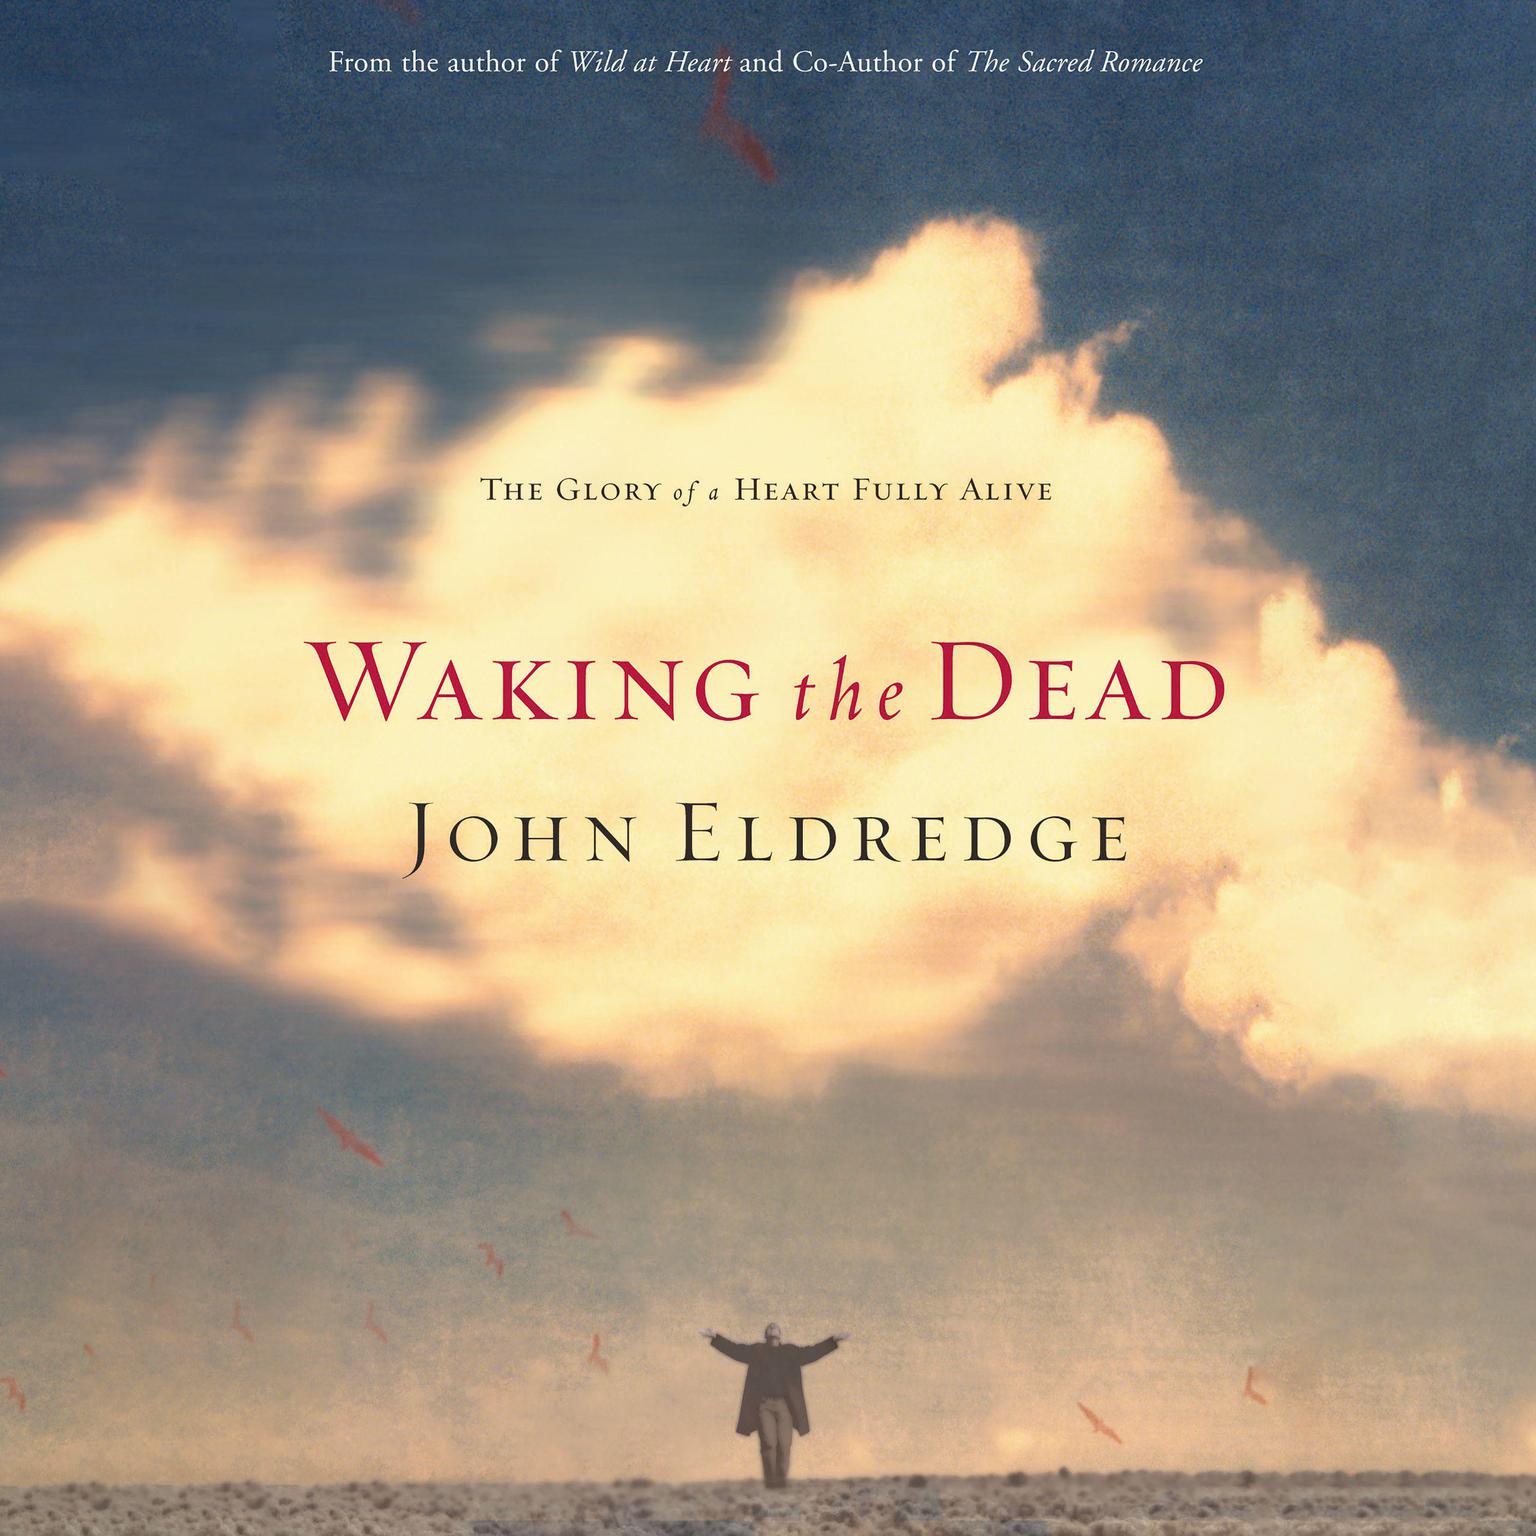 Waking the Dead (Abridged): The Glory of a Heart Fully Alive Audiobook, by John Eldredge